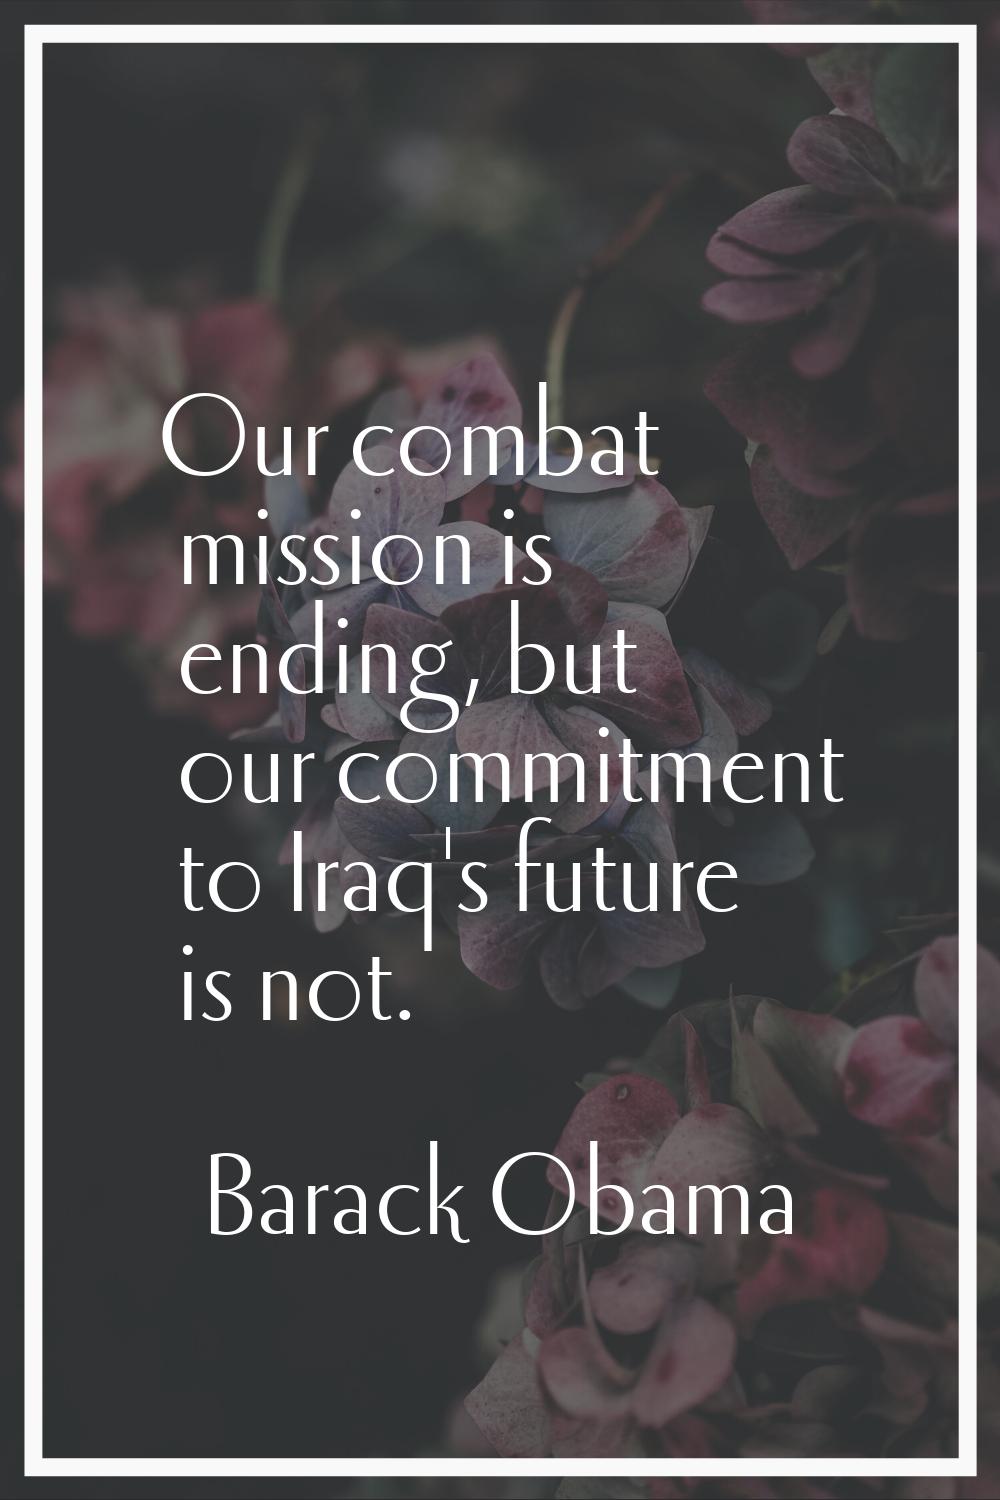 Our combat mission is ending, but our commitment to Iraq's future is not.